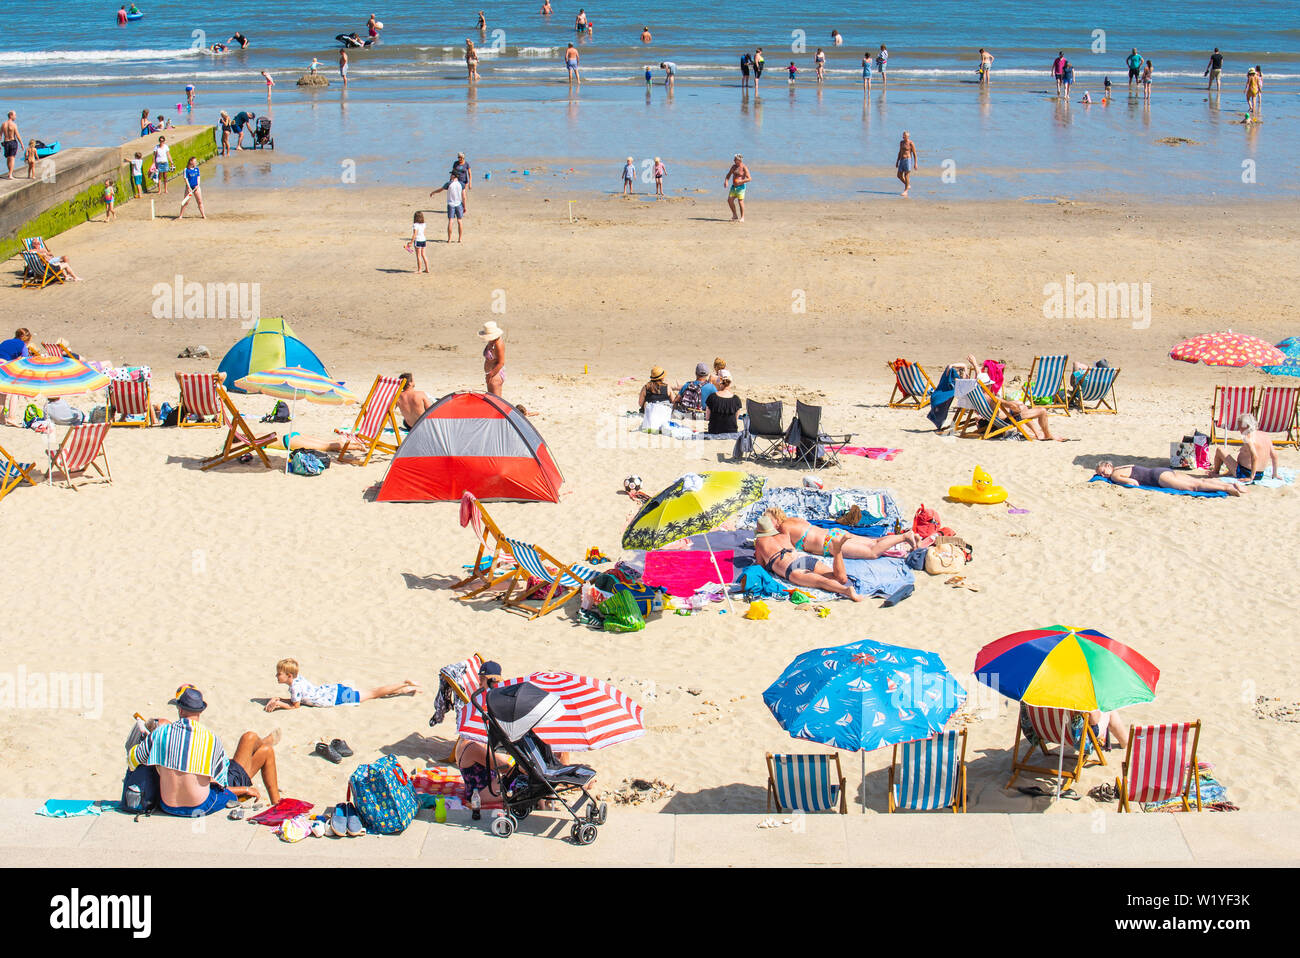 Lyme Regis, Dorset, UK. 4th July 2019. UK Weather: The beach at the seaside resort of Lyme Regis was busy this afternoon as sunseekers enjoyed the scorching hot sunshine and blue skies. Credit: Celia McMahon/Alamy Live News. Stock Photo